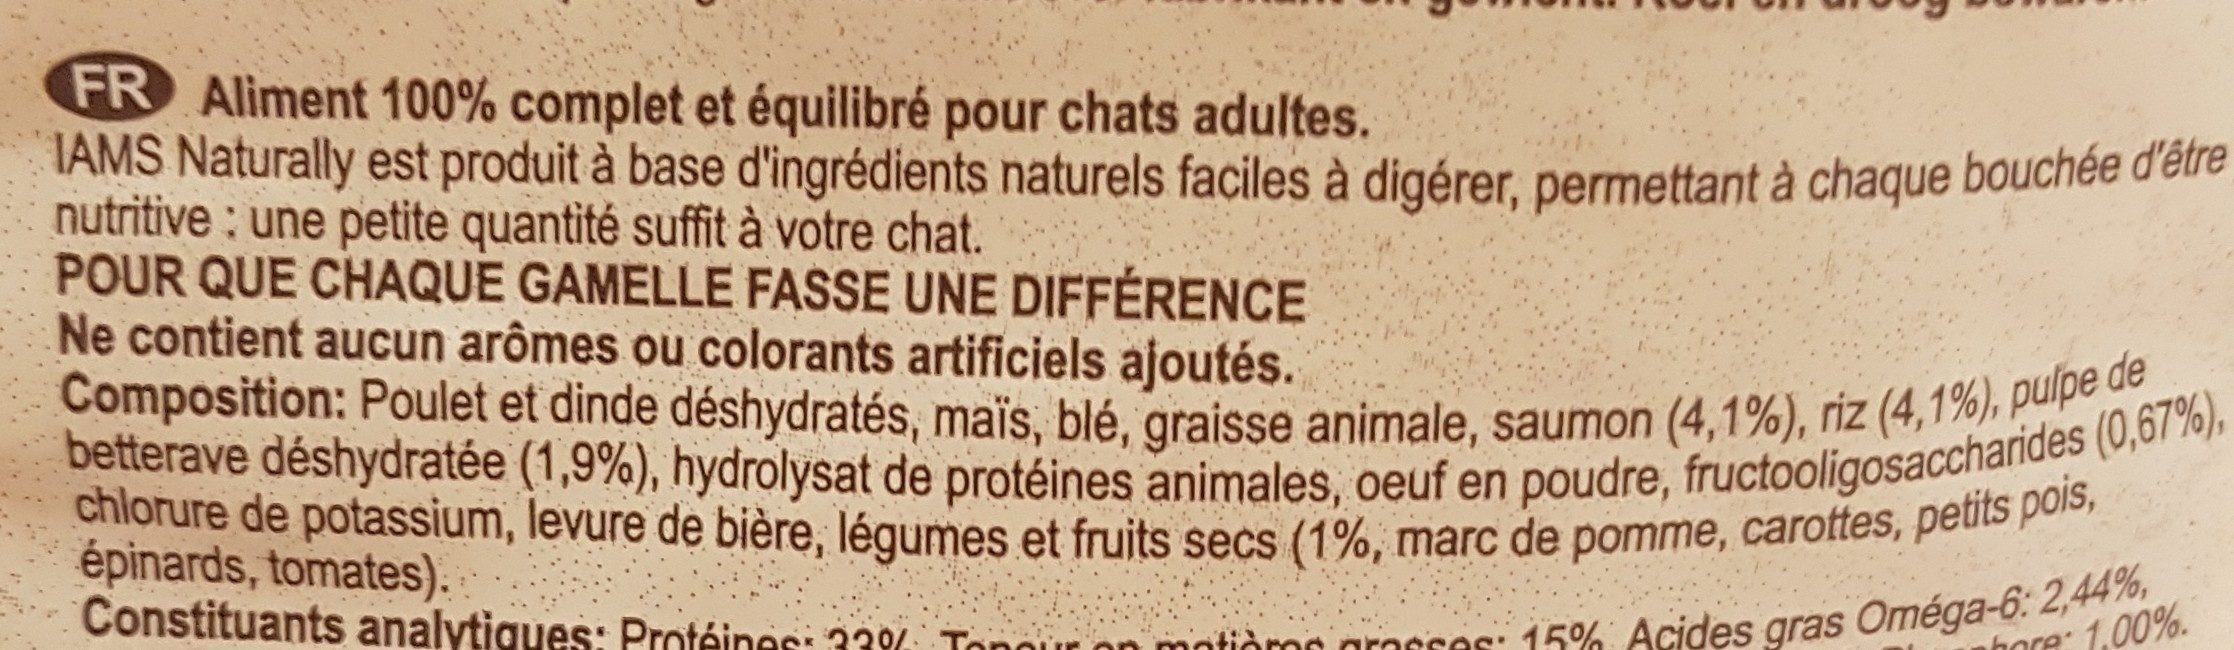 Iams Naturally Adult Cat Salmon and Rice - Ingrédients - fr